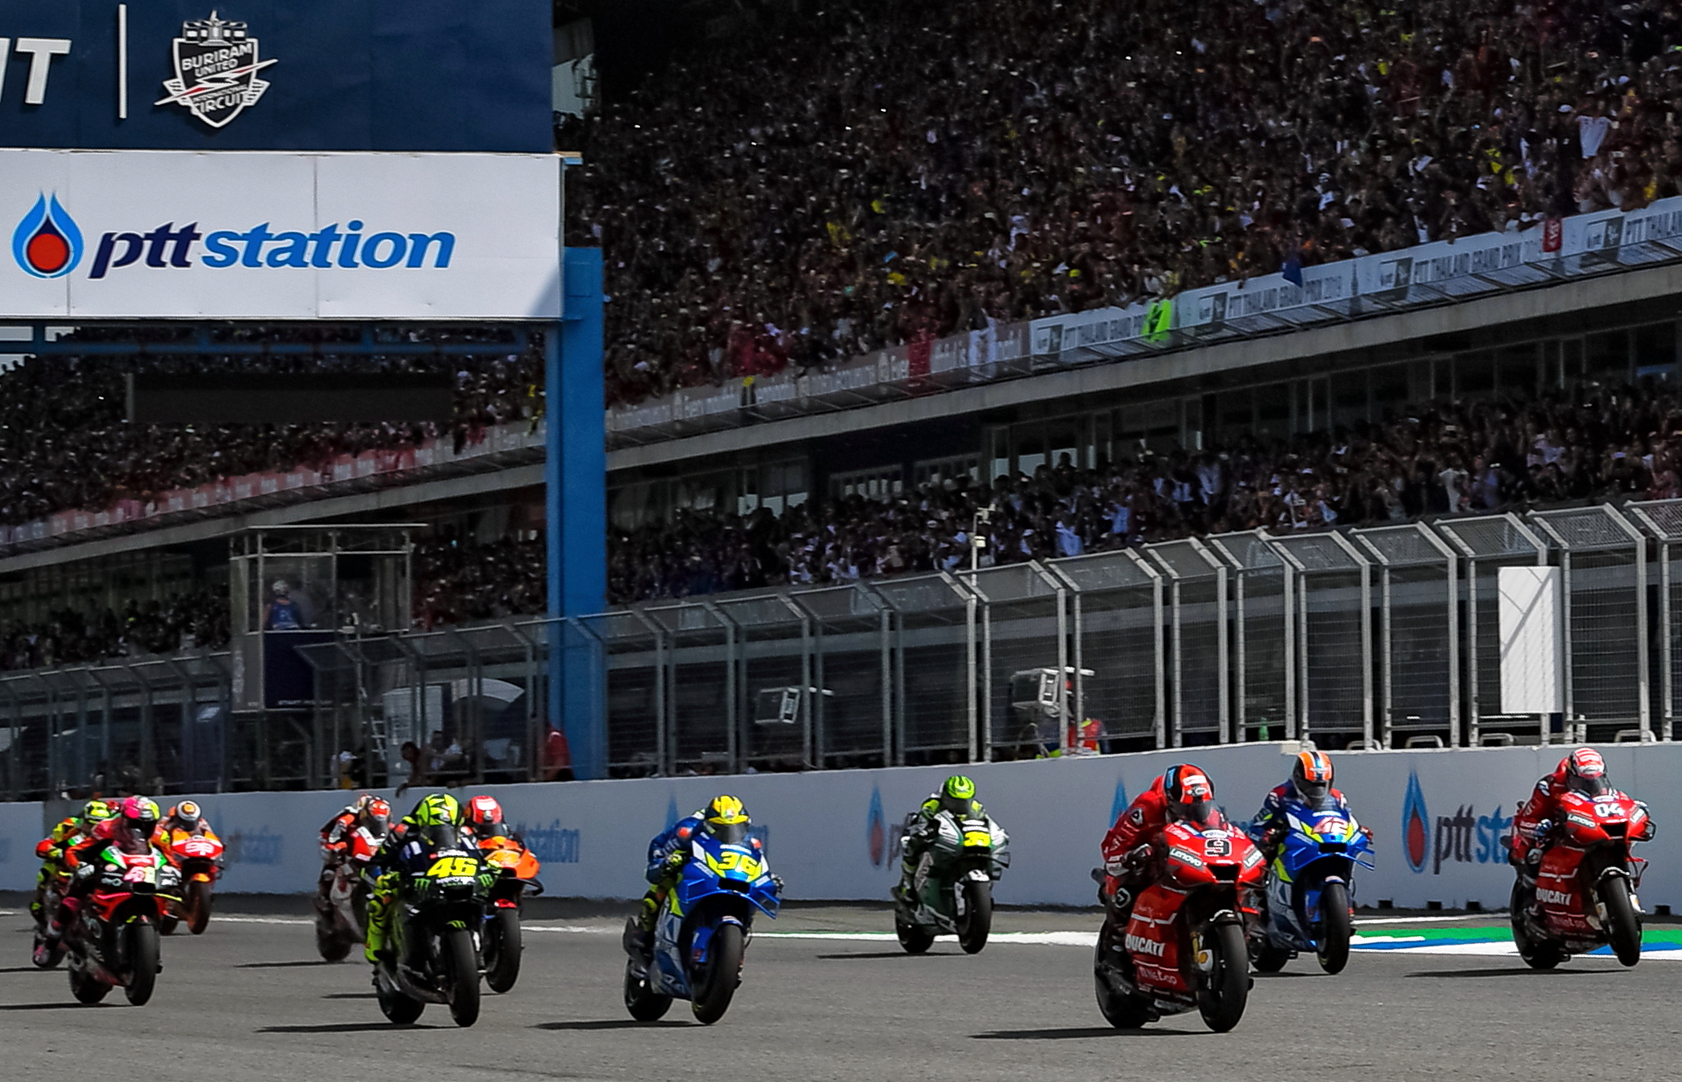 The MotoGP in Buri Ram attracts teams, media and fans from around the world, bring much needed income and media attention to this beautiful part of Isaan. Click to enlarge.